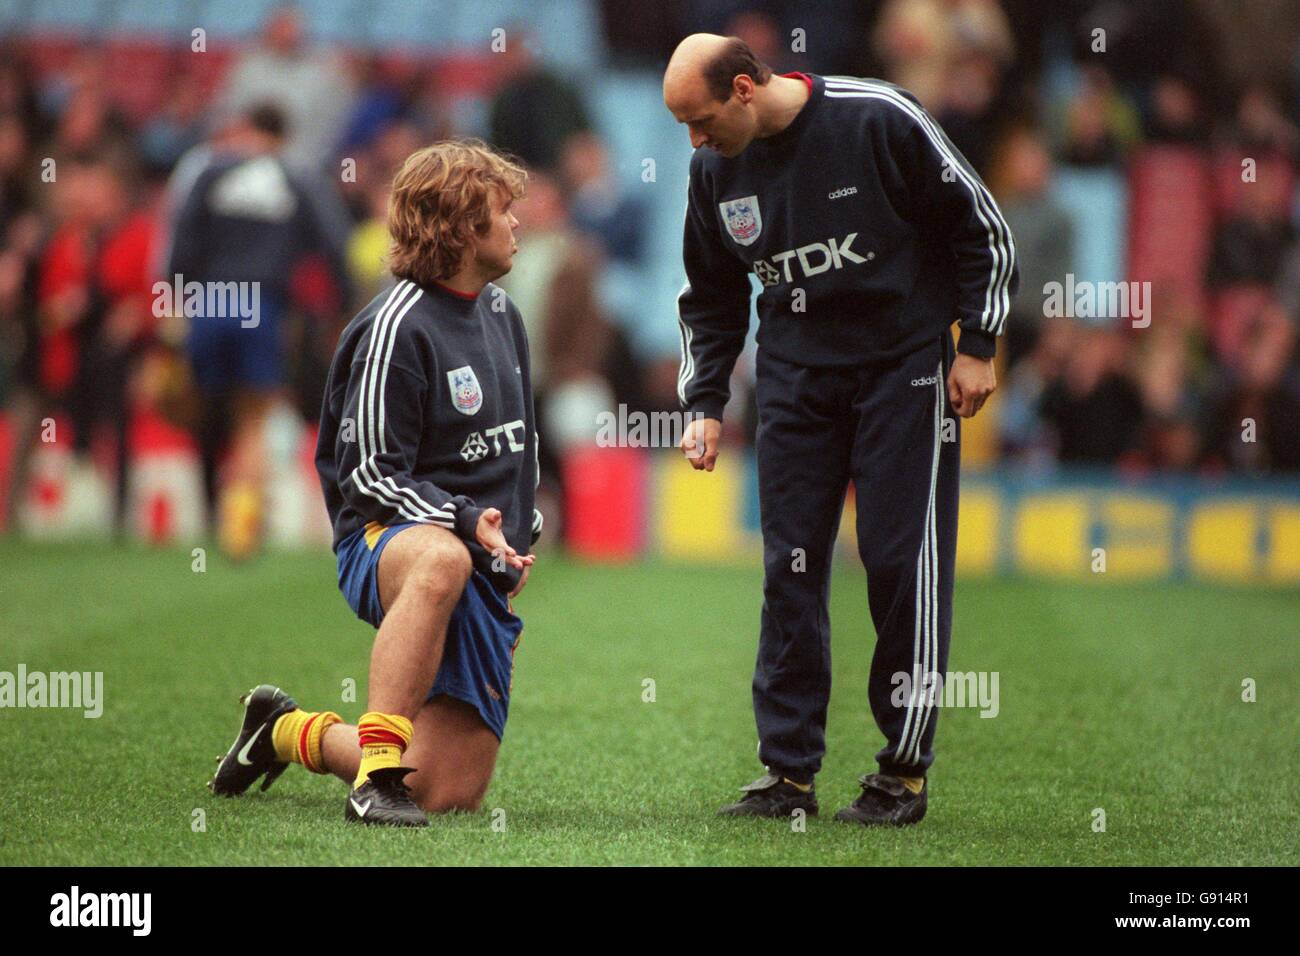 Crystal Palace player-manager Attilio Lombardo (right) talks to his  assistant Thomas Brolin (left) as they warm up before the match Stock Photo  - Alamy